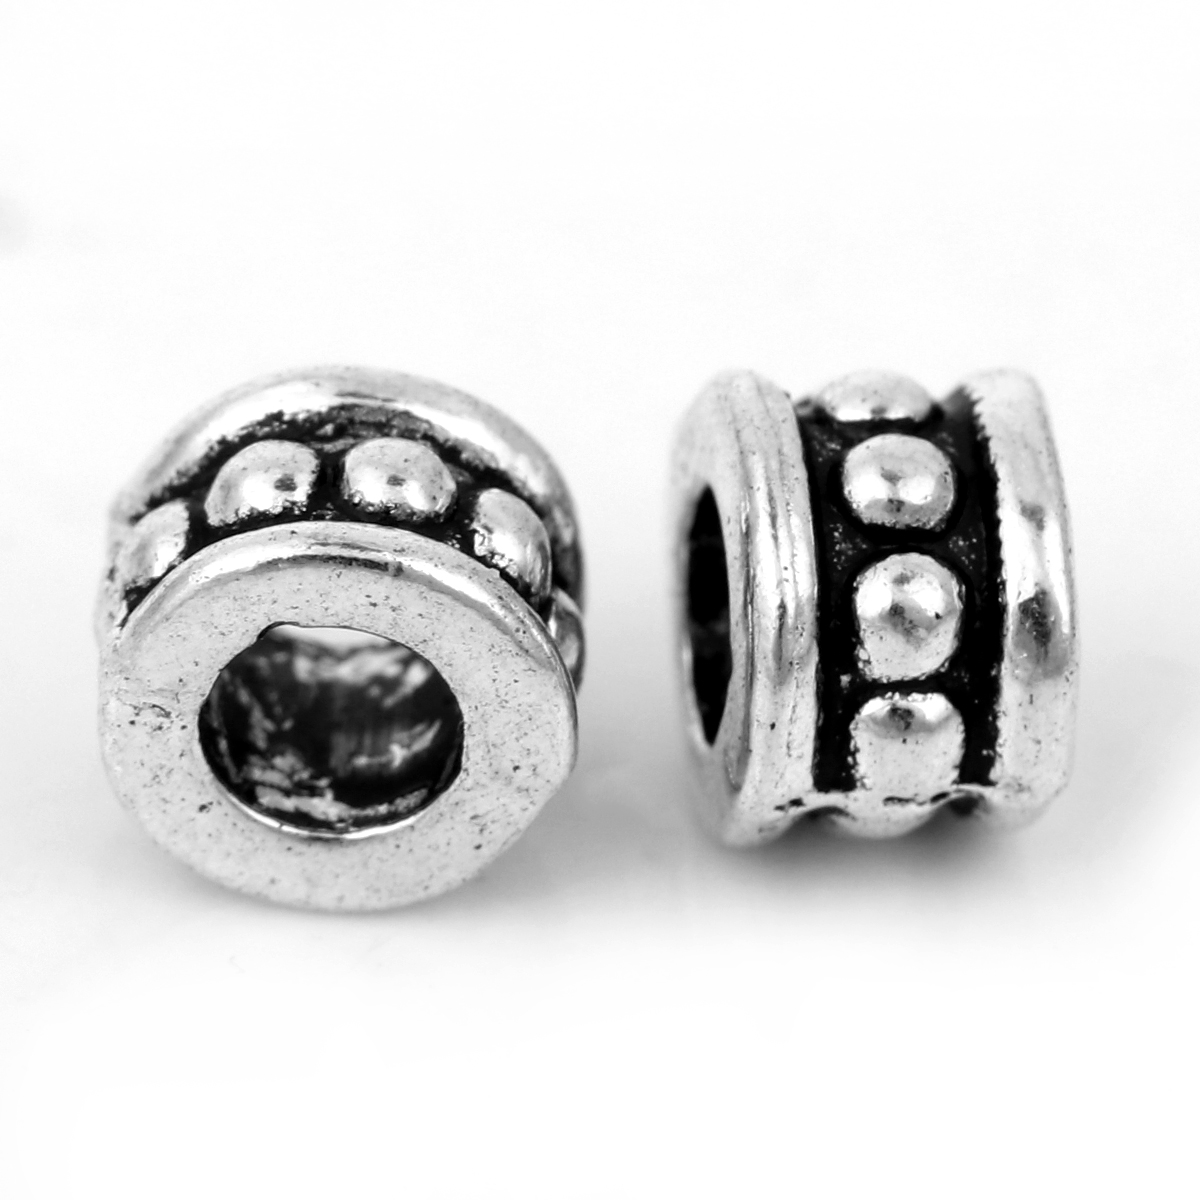 Picture of Zinc Based Alloy Spacer Beads Cylinder Antique Silver About 6mm x 4mm, 100 PCs